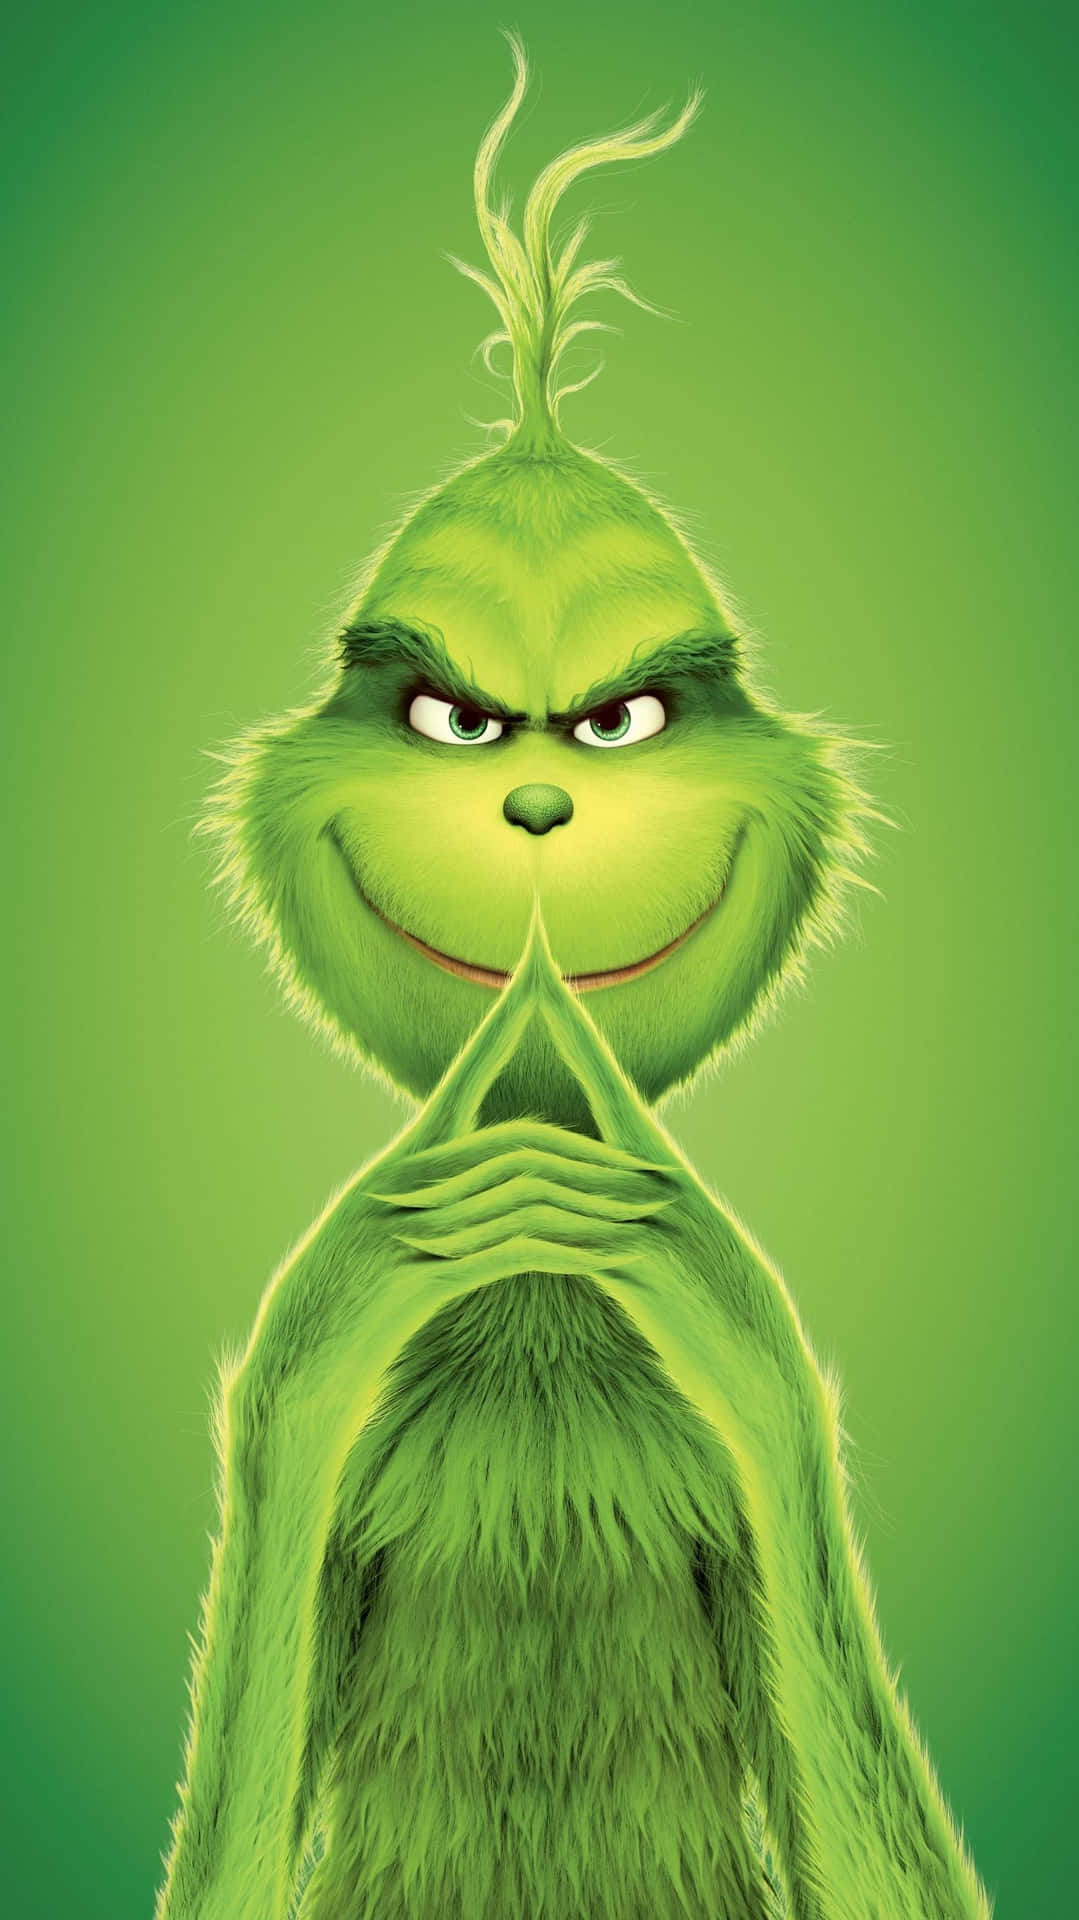 Join The Grinch In Celebrating Christmas! Wallpaper